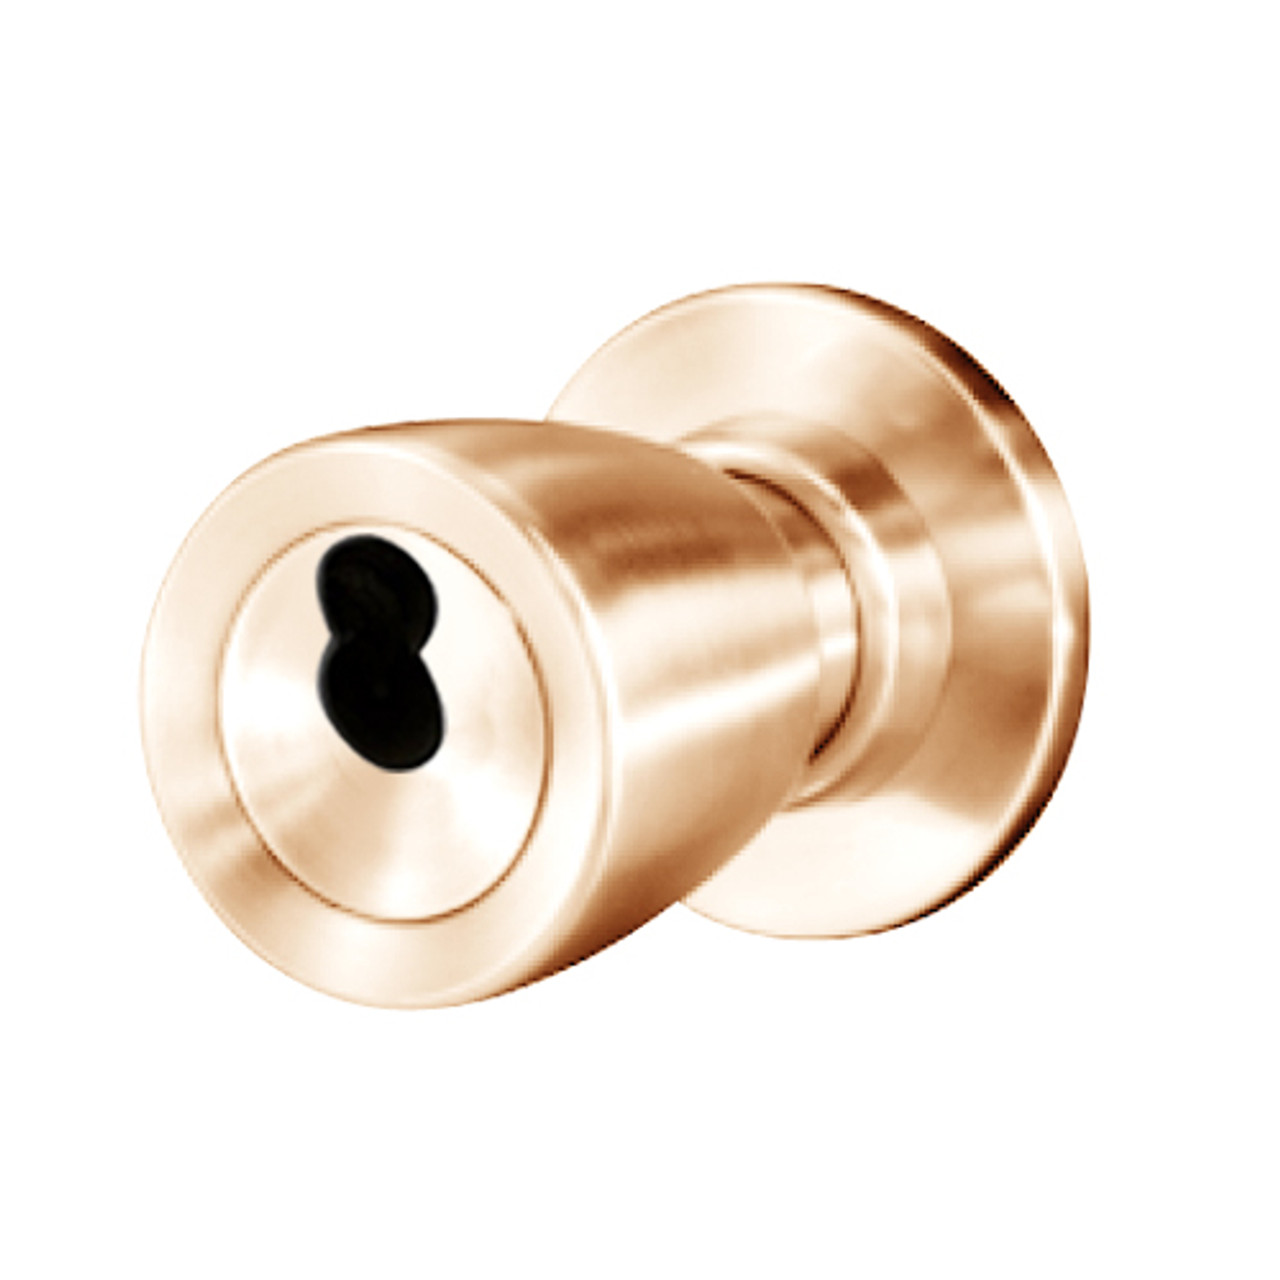 8K37YD6CS3611 Best 8K Series Exit Heavy Duty Cylindrical Knob Locks with Tulip Style in Bright Bronze